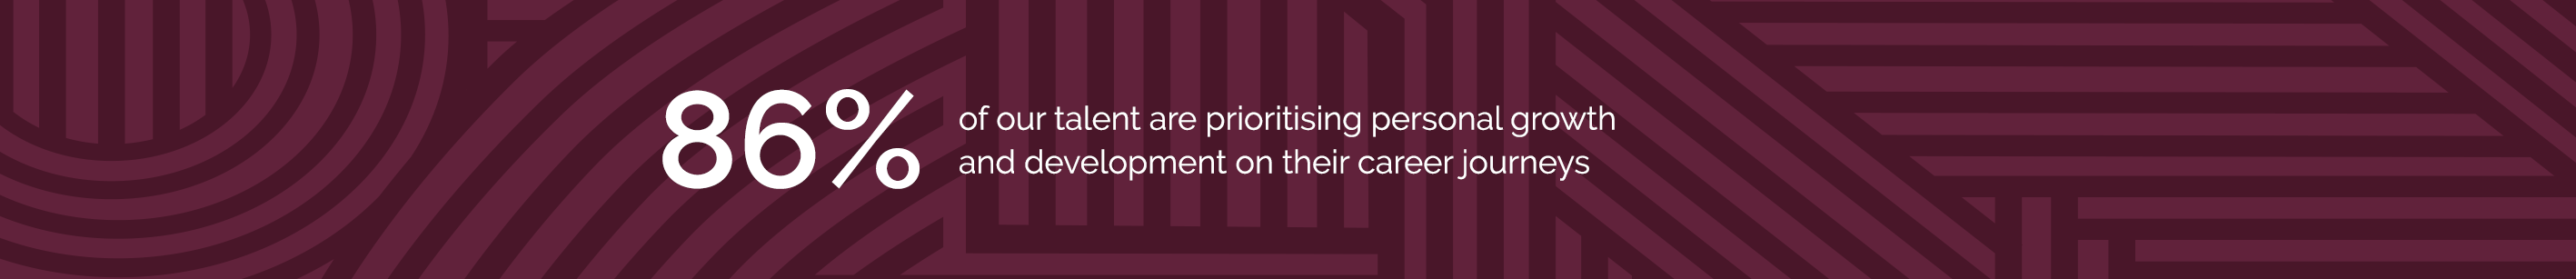 86% of our talent are prioritising personal growth and development on their career journeys